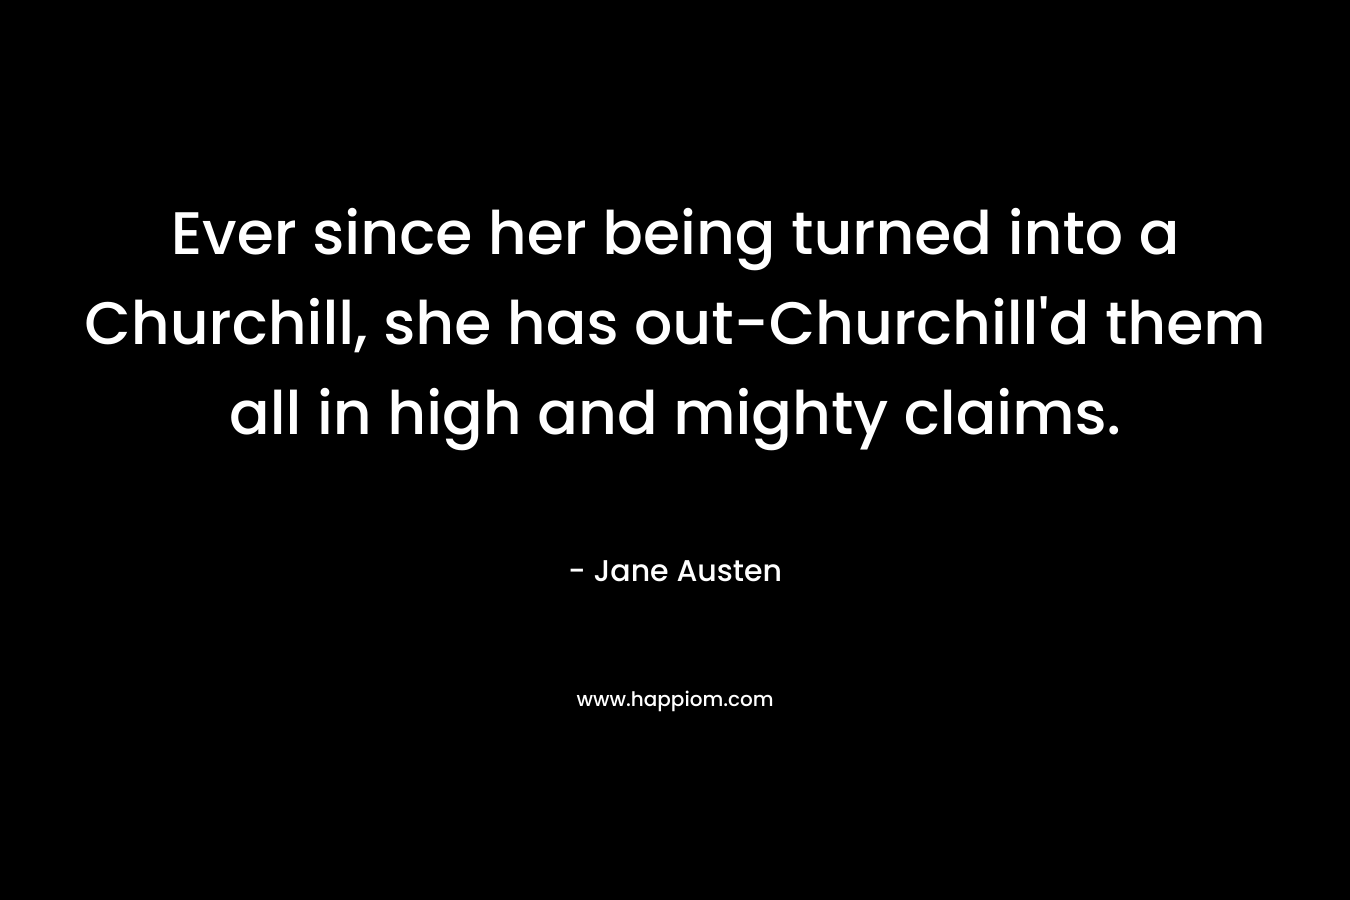 Ever since her being turned into a Churchill, she has out-Churchill'd them all in high and mighty claims.